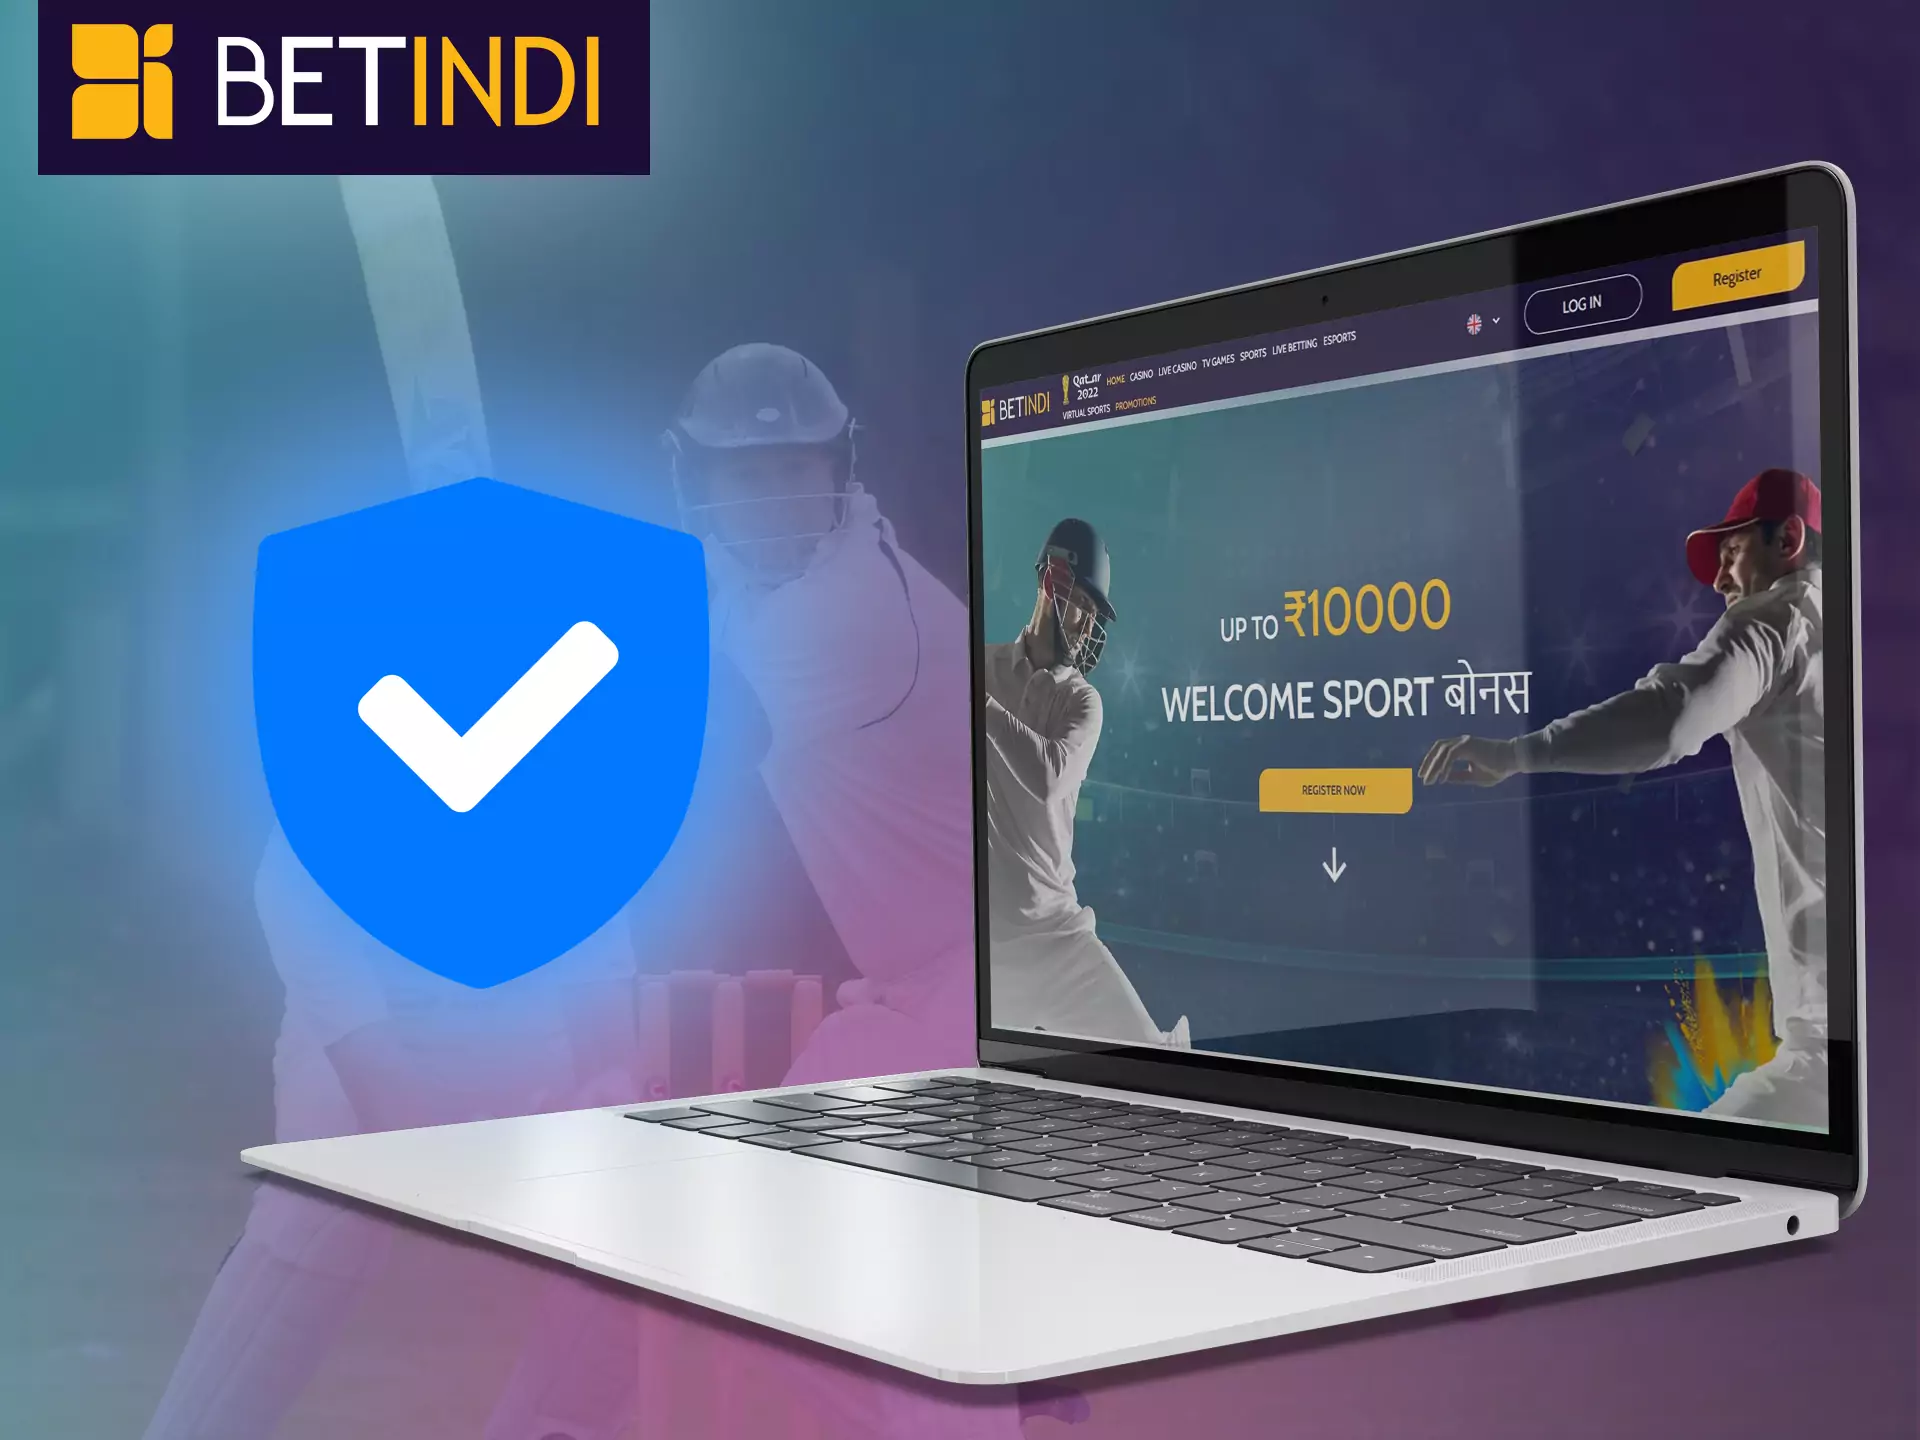 Betindi is safe for players, all data will be protected.